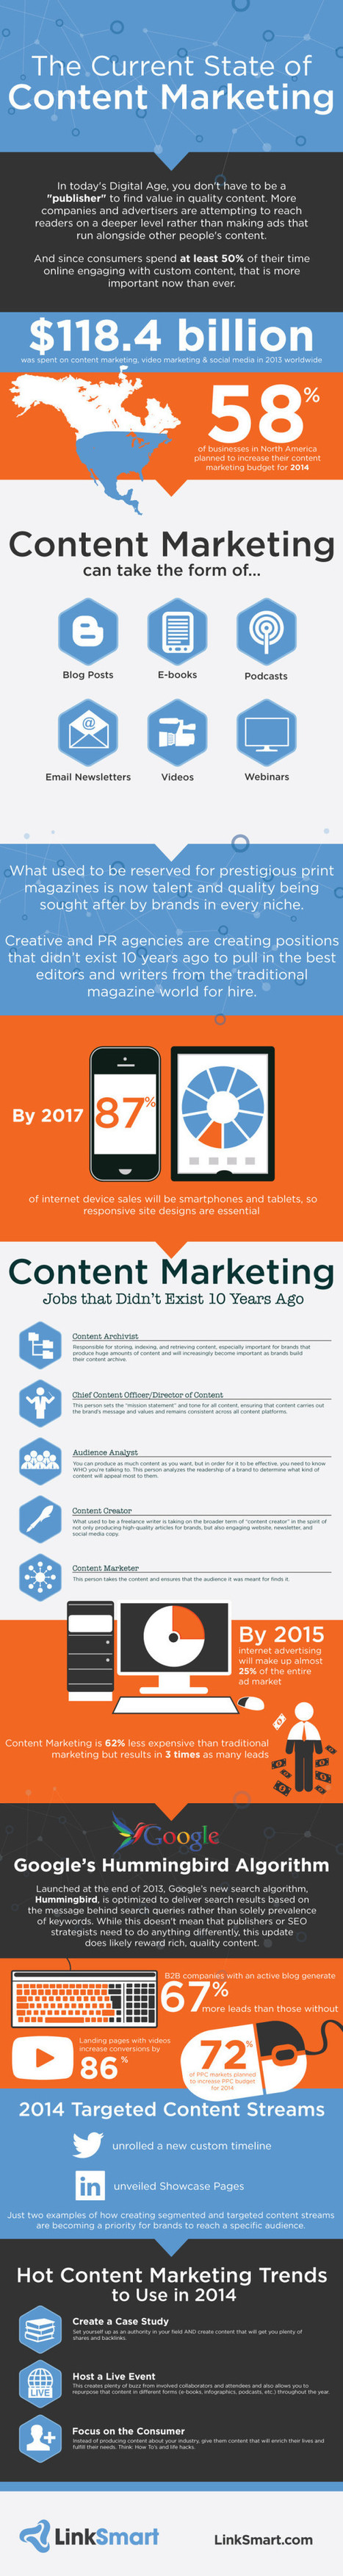 The Current State of Content Marketing 2014 - Marketing Technology Blog | digital marketing strategy | Scoop.it